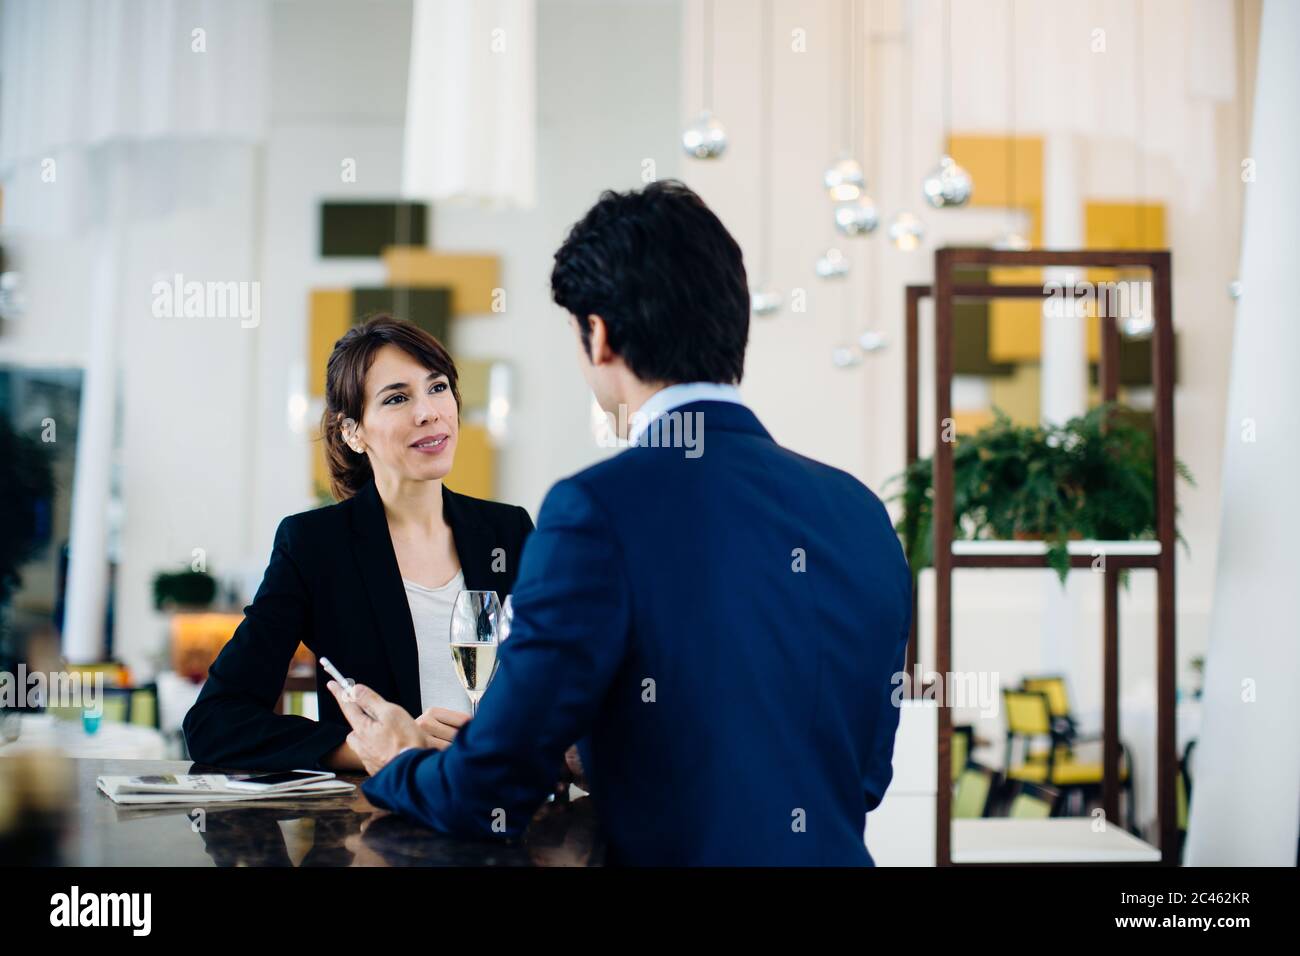 Businessman and businesswoman having drink at bar Stock Photo